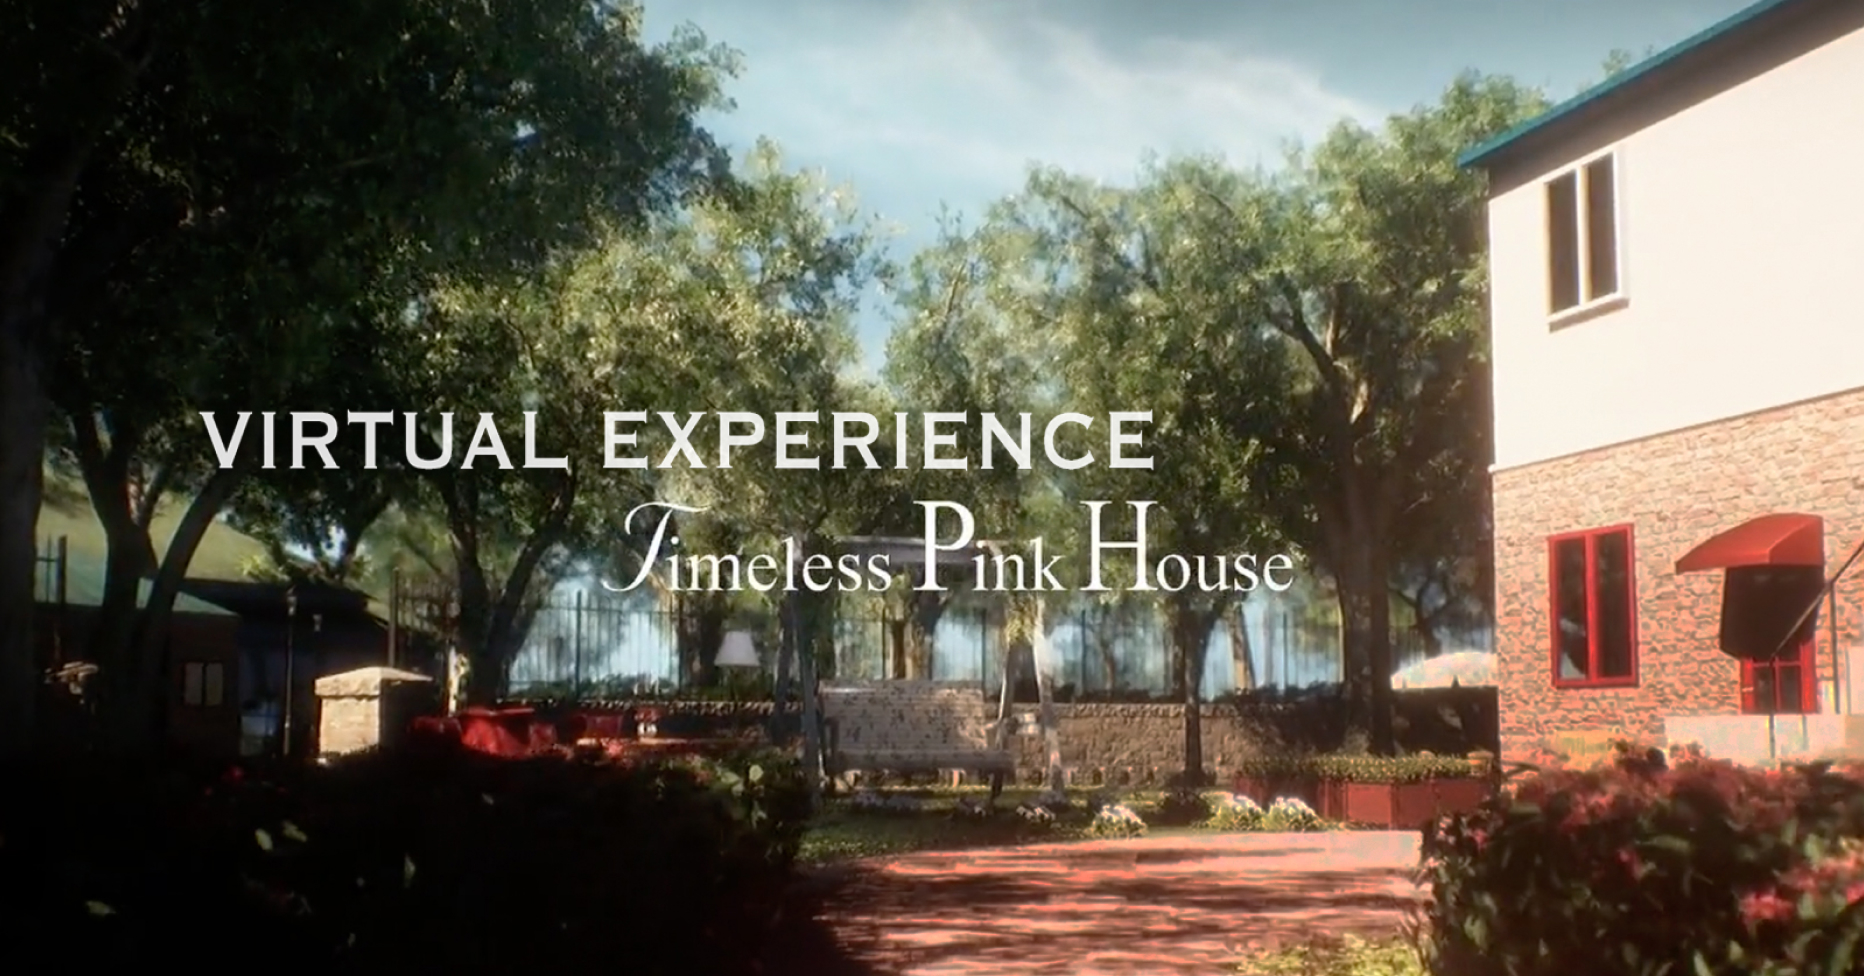 VR Timeless Pink House